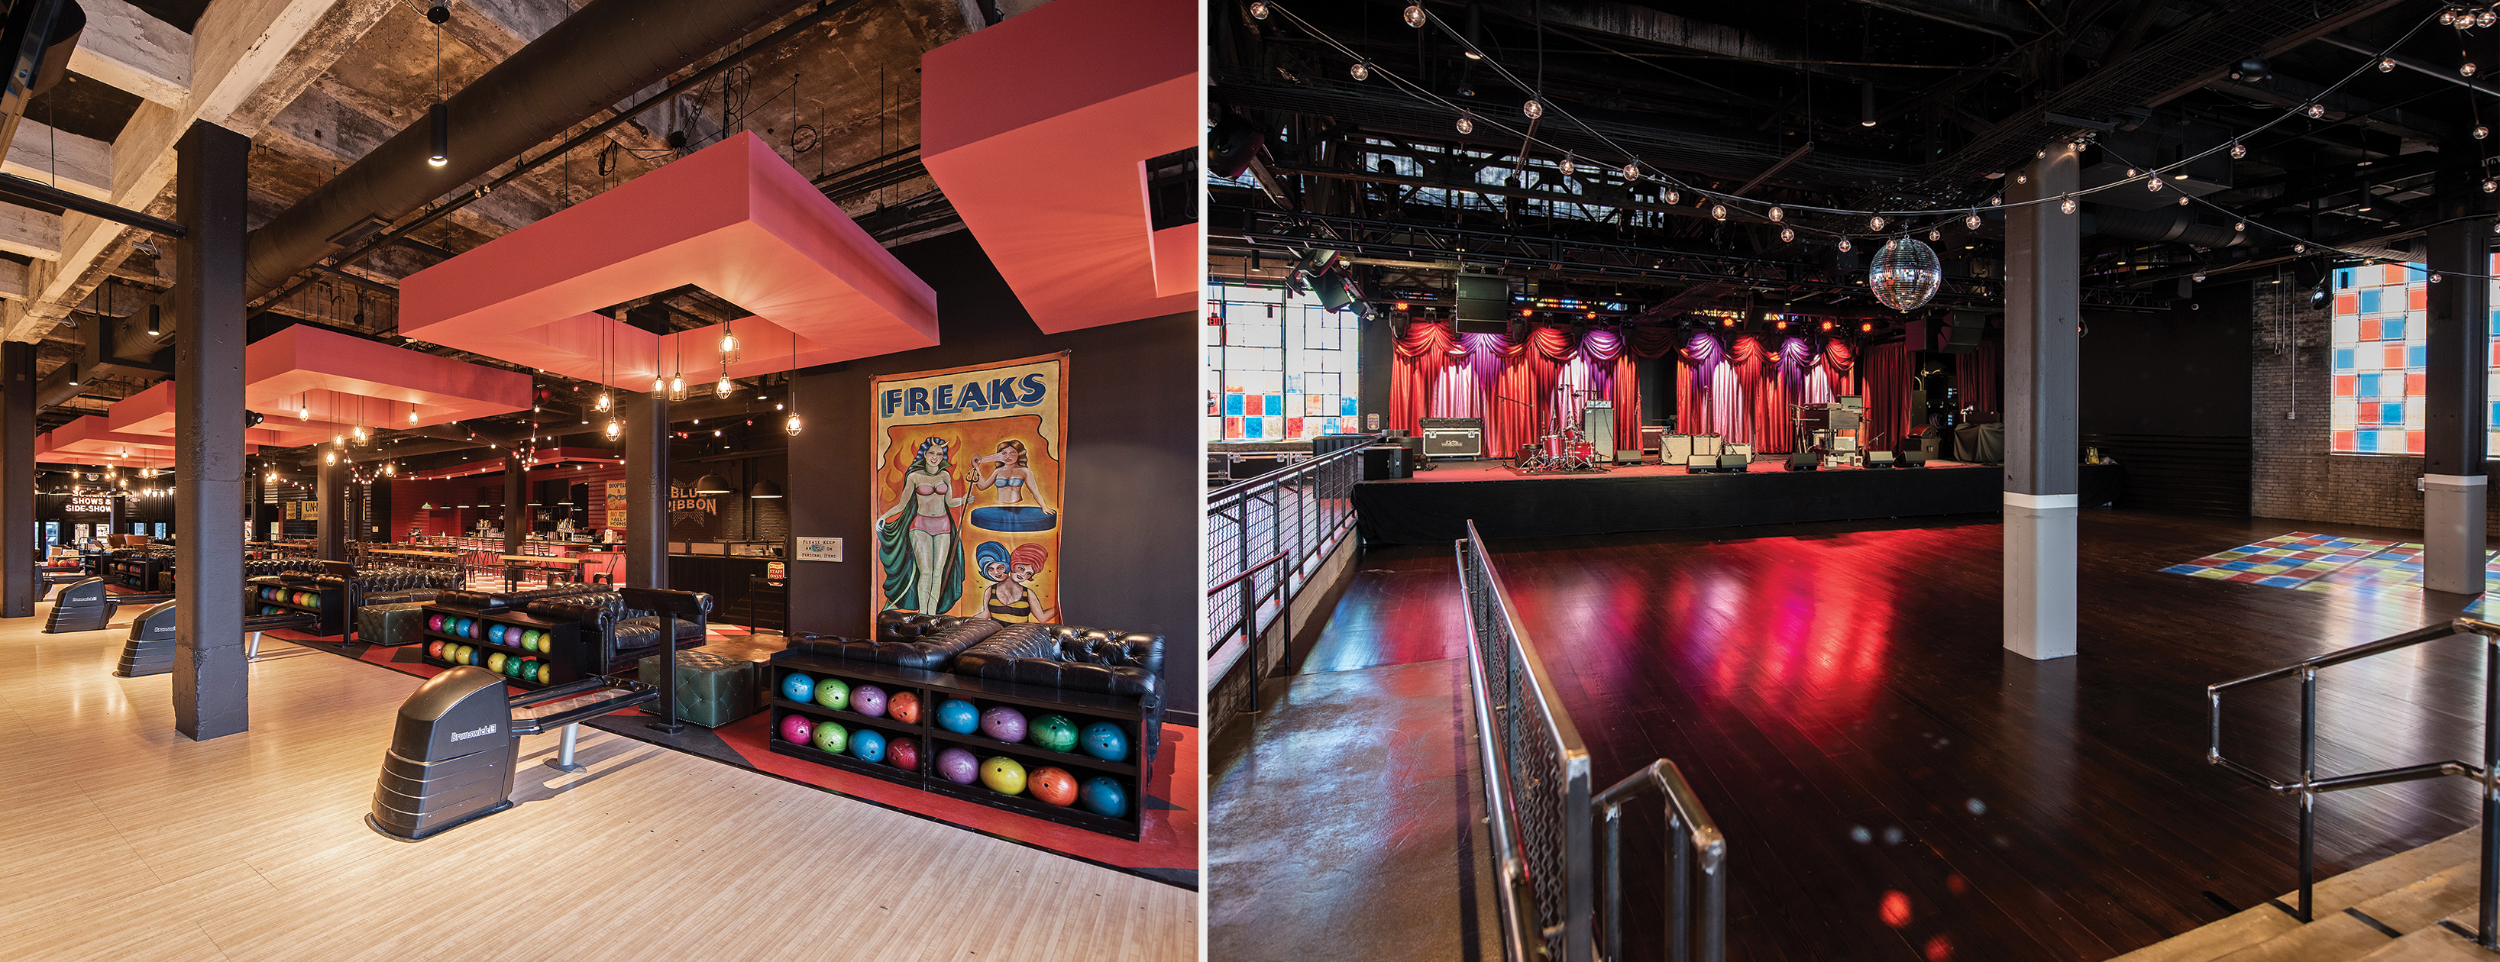 Brooklyn Bowl Sets a New Standard for Bowling Alleys